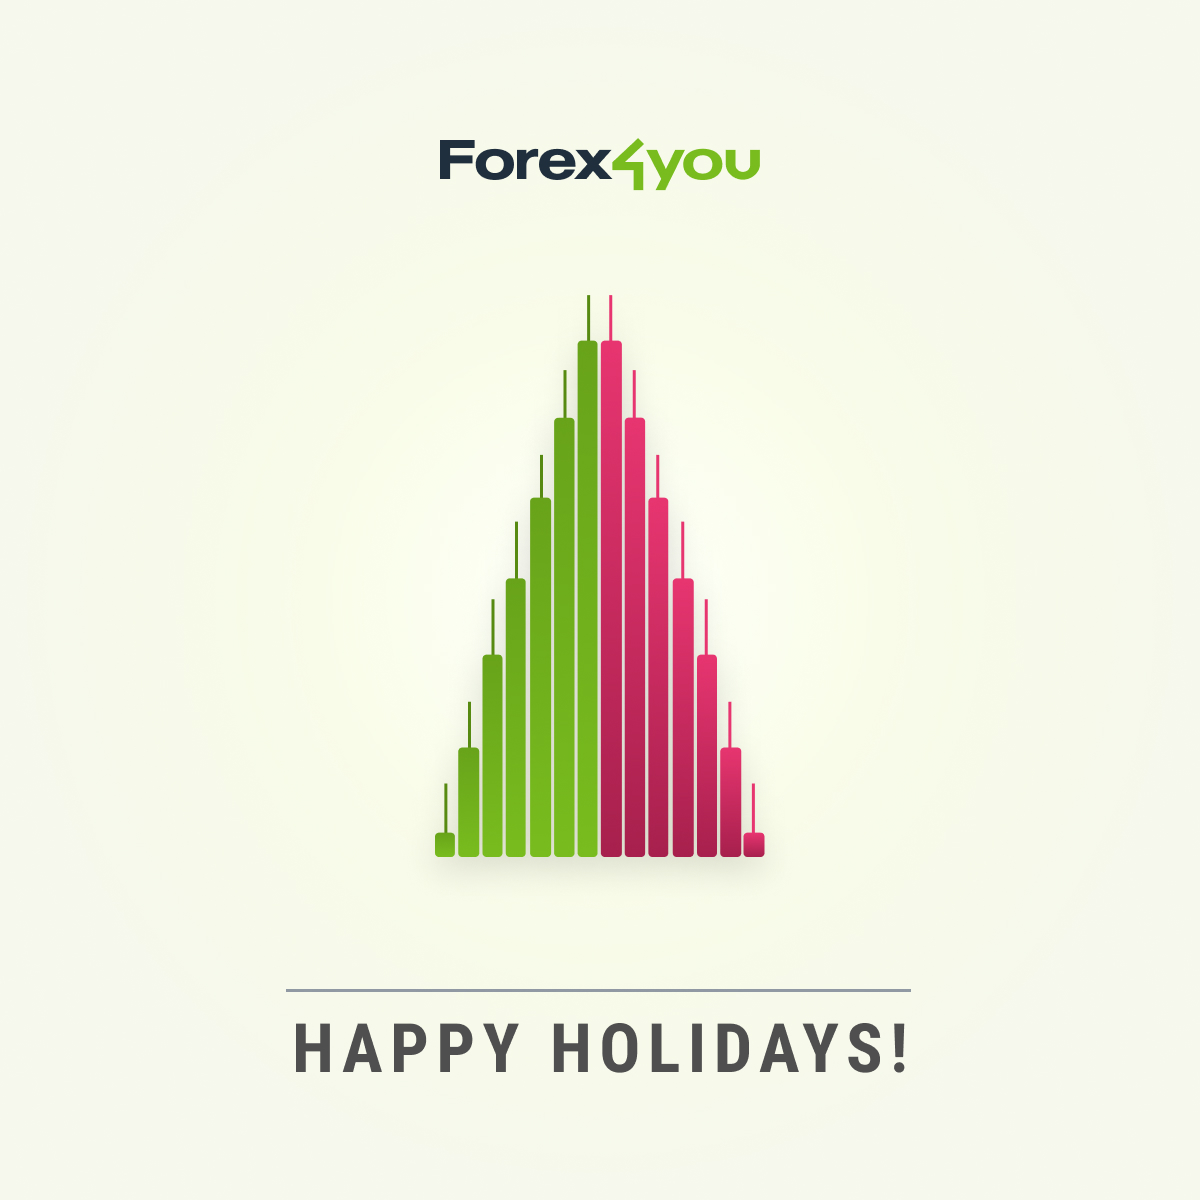 2019 Xmas Wishes from Forex4you!